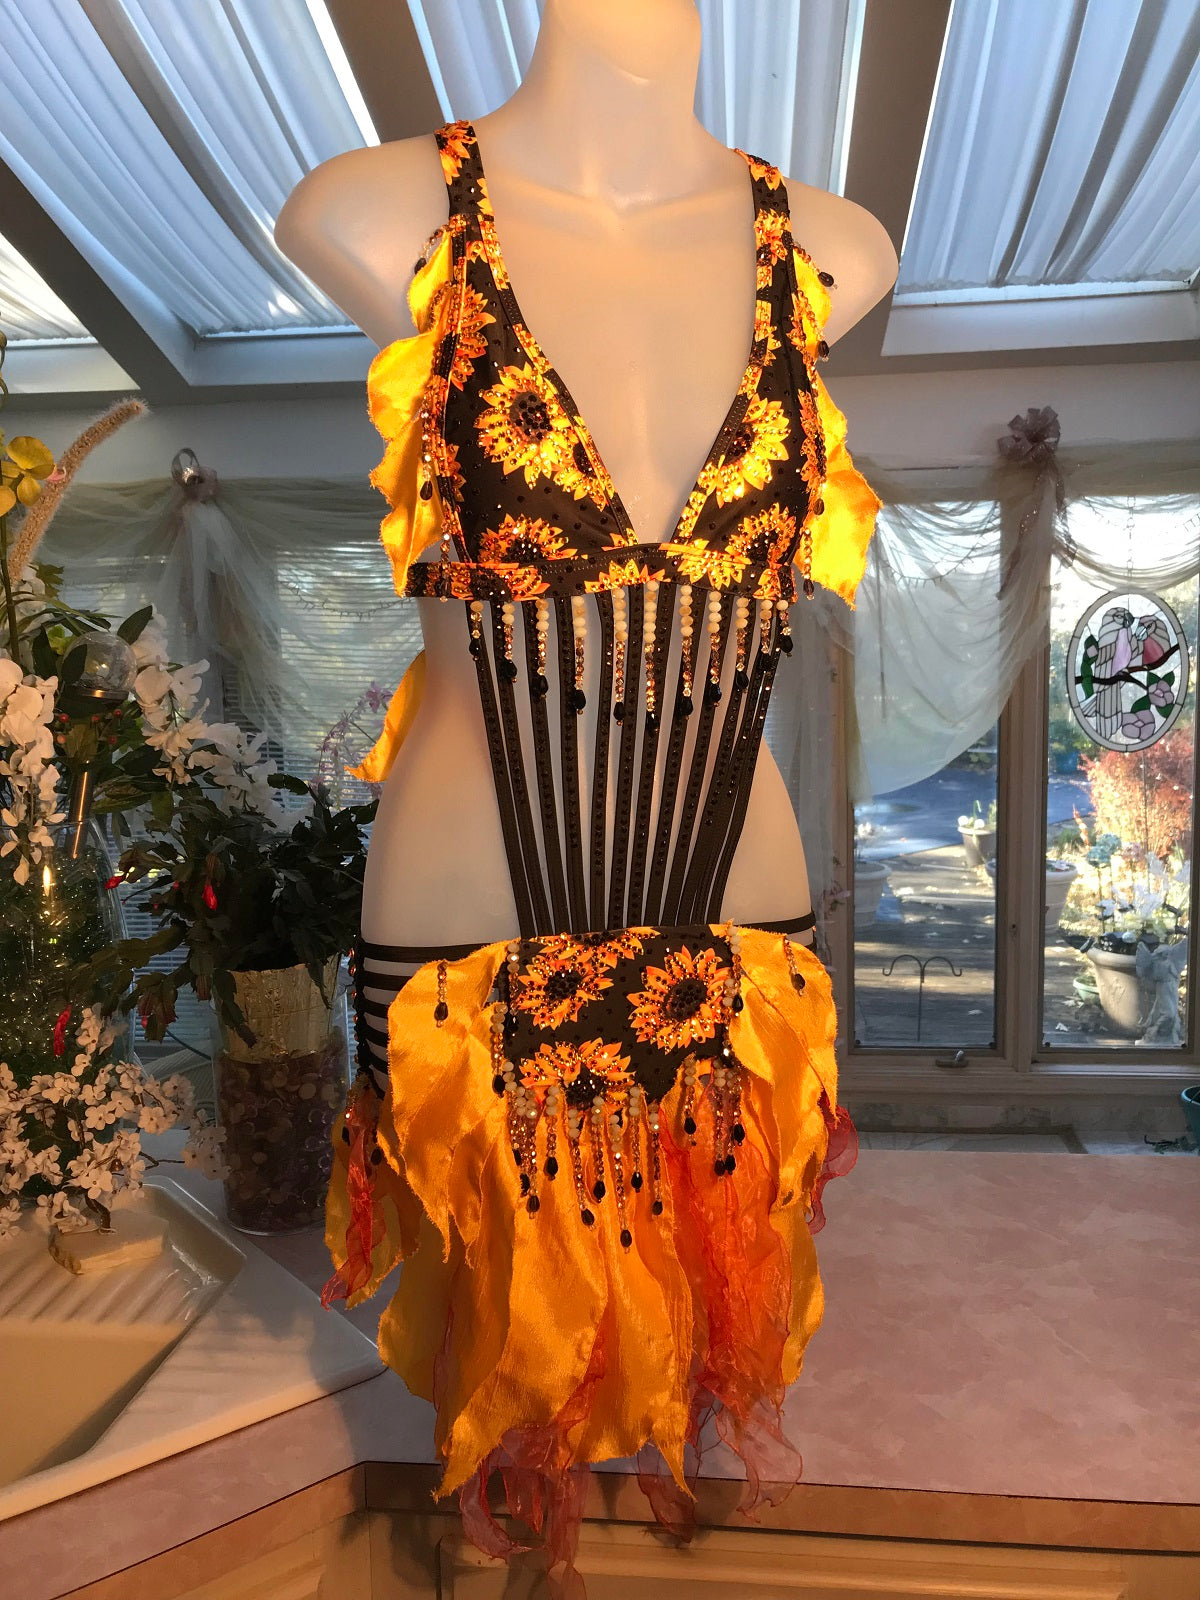 sunflower print Latin-rhythm dress created from a very strappy detailed bathing suit which I added hand crafted petal shape flounces in sunflower yellow satin & orange variegated organza, with extensive Swarovski hand beading in orange, pearlescent, gold & black faceted beads in round & tear drop shapes along with Swarovski rhinestone work throughout in yellow, orange & bronze.